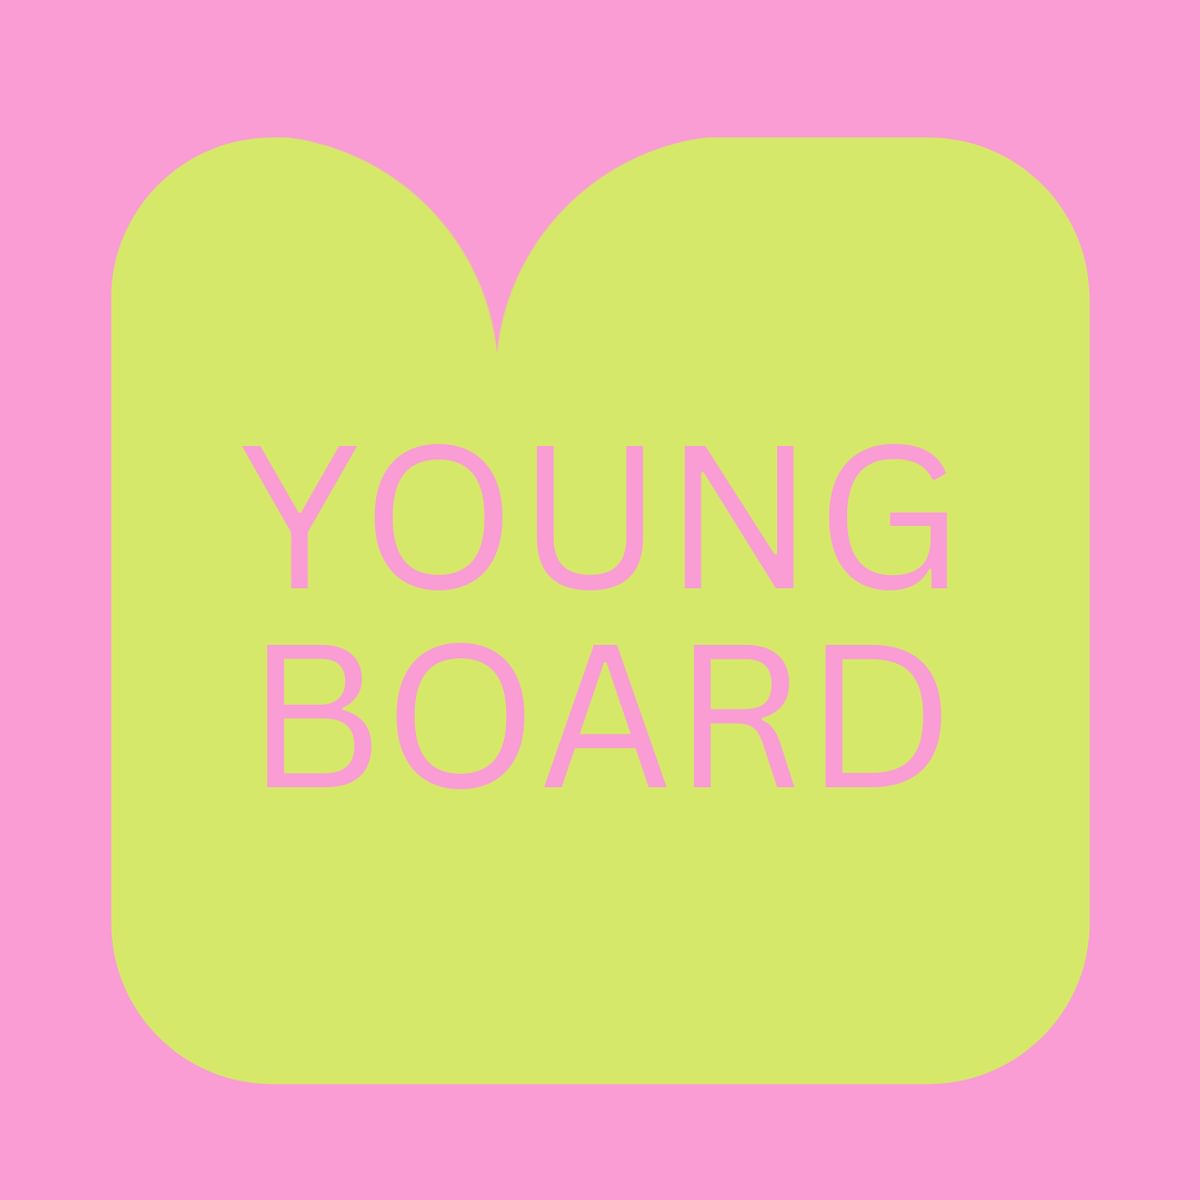 YOUNG BOARD BY JONG VOLK!